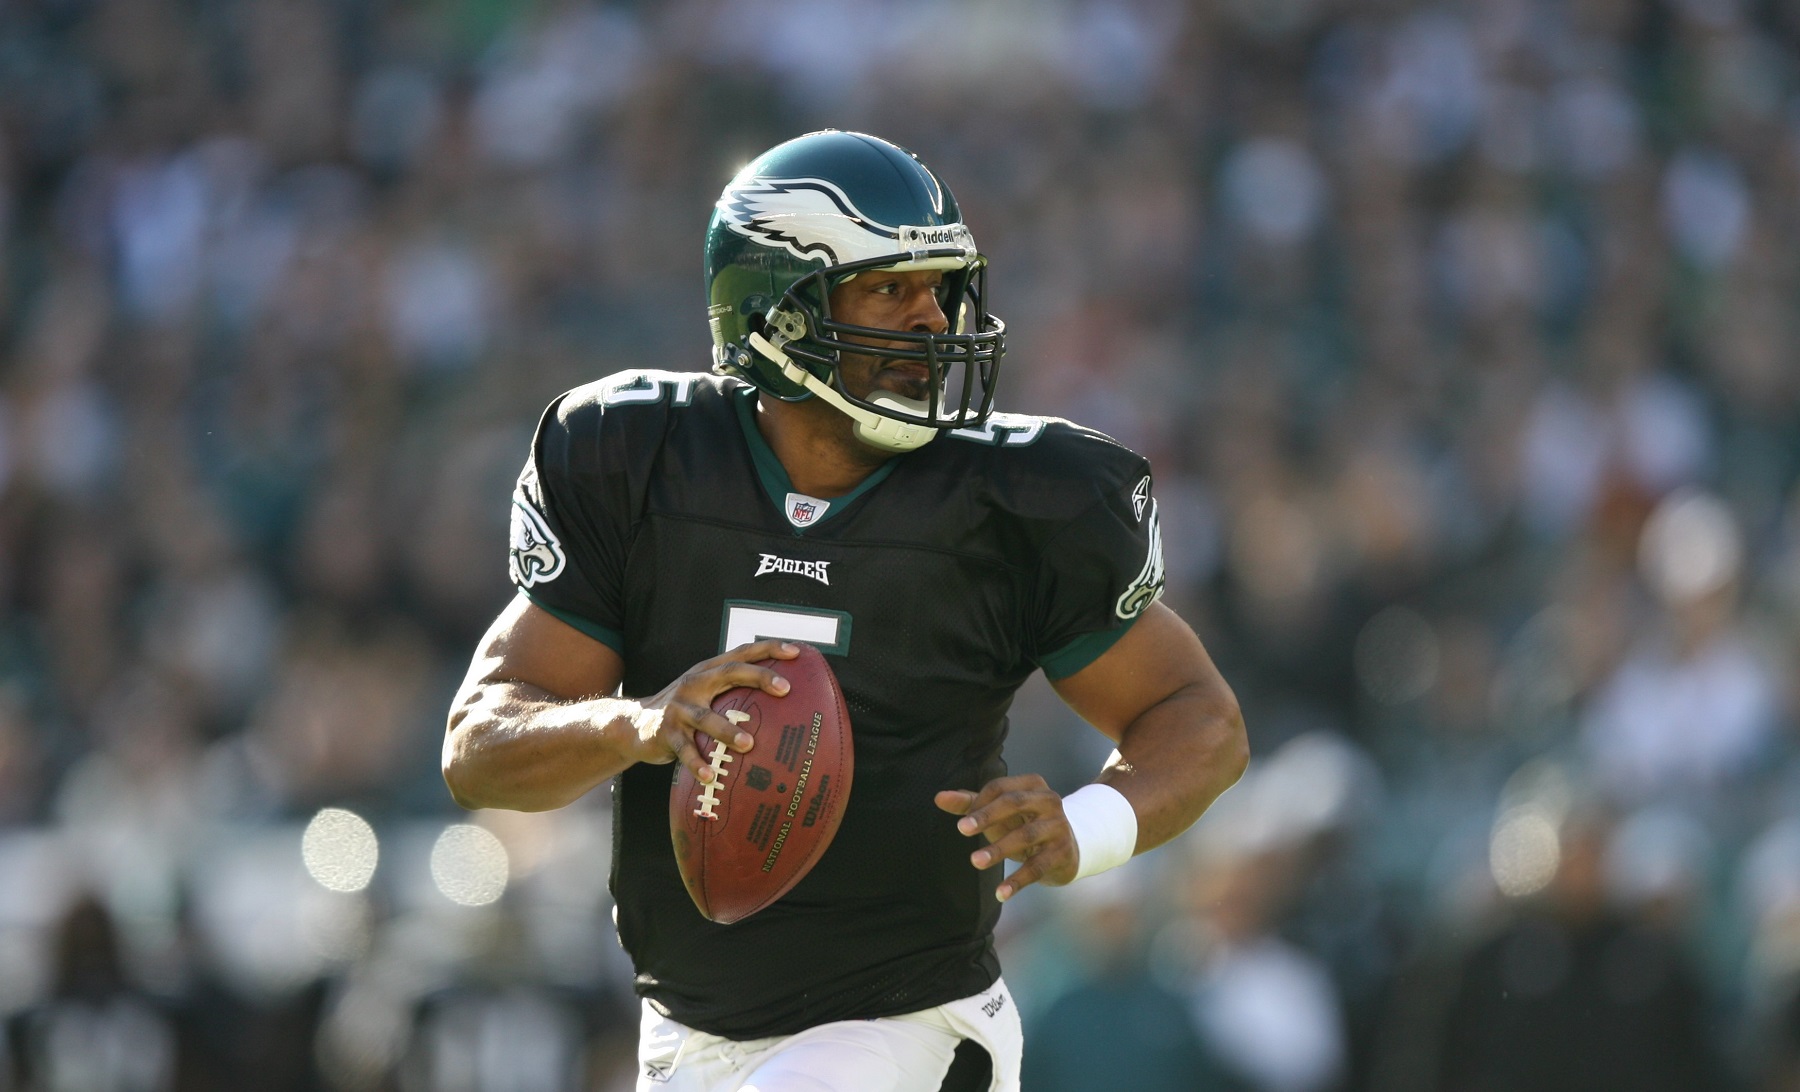 What Did Rush Limbaugh Say About Donovan McNabb That Cost Him His Job?